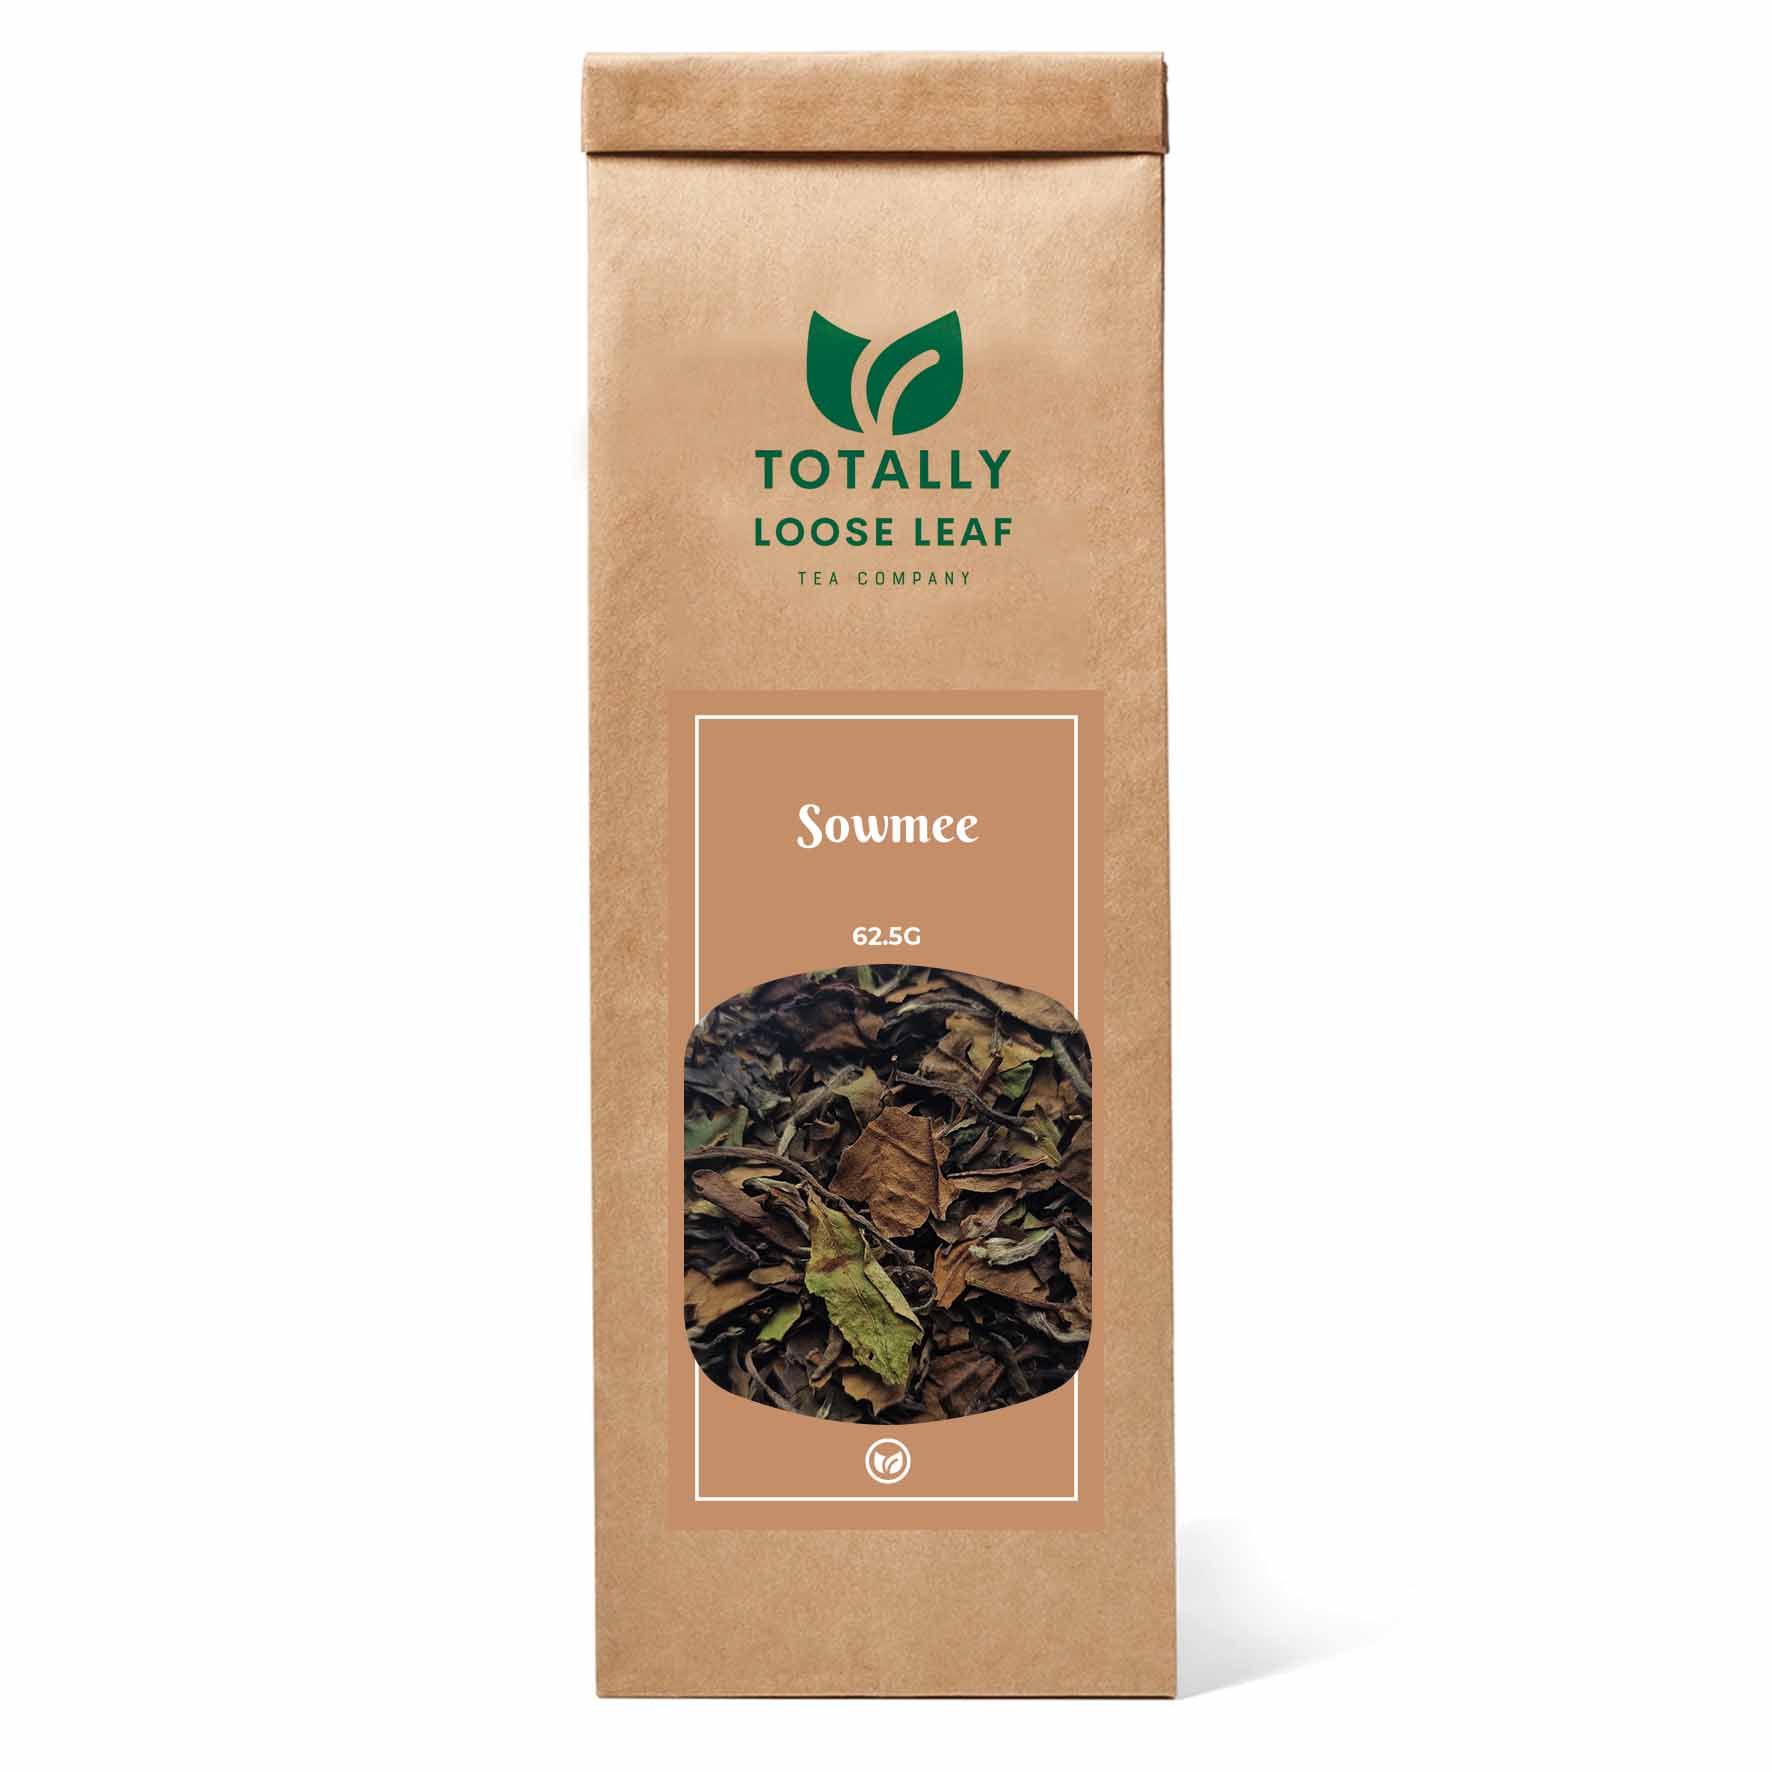 Sowmee White Loose Leaf Tea - one pouch